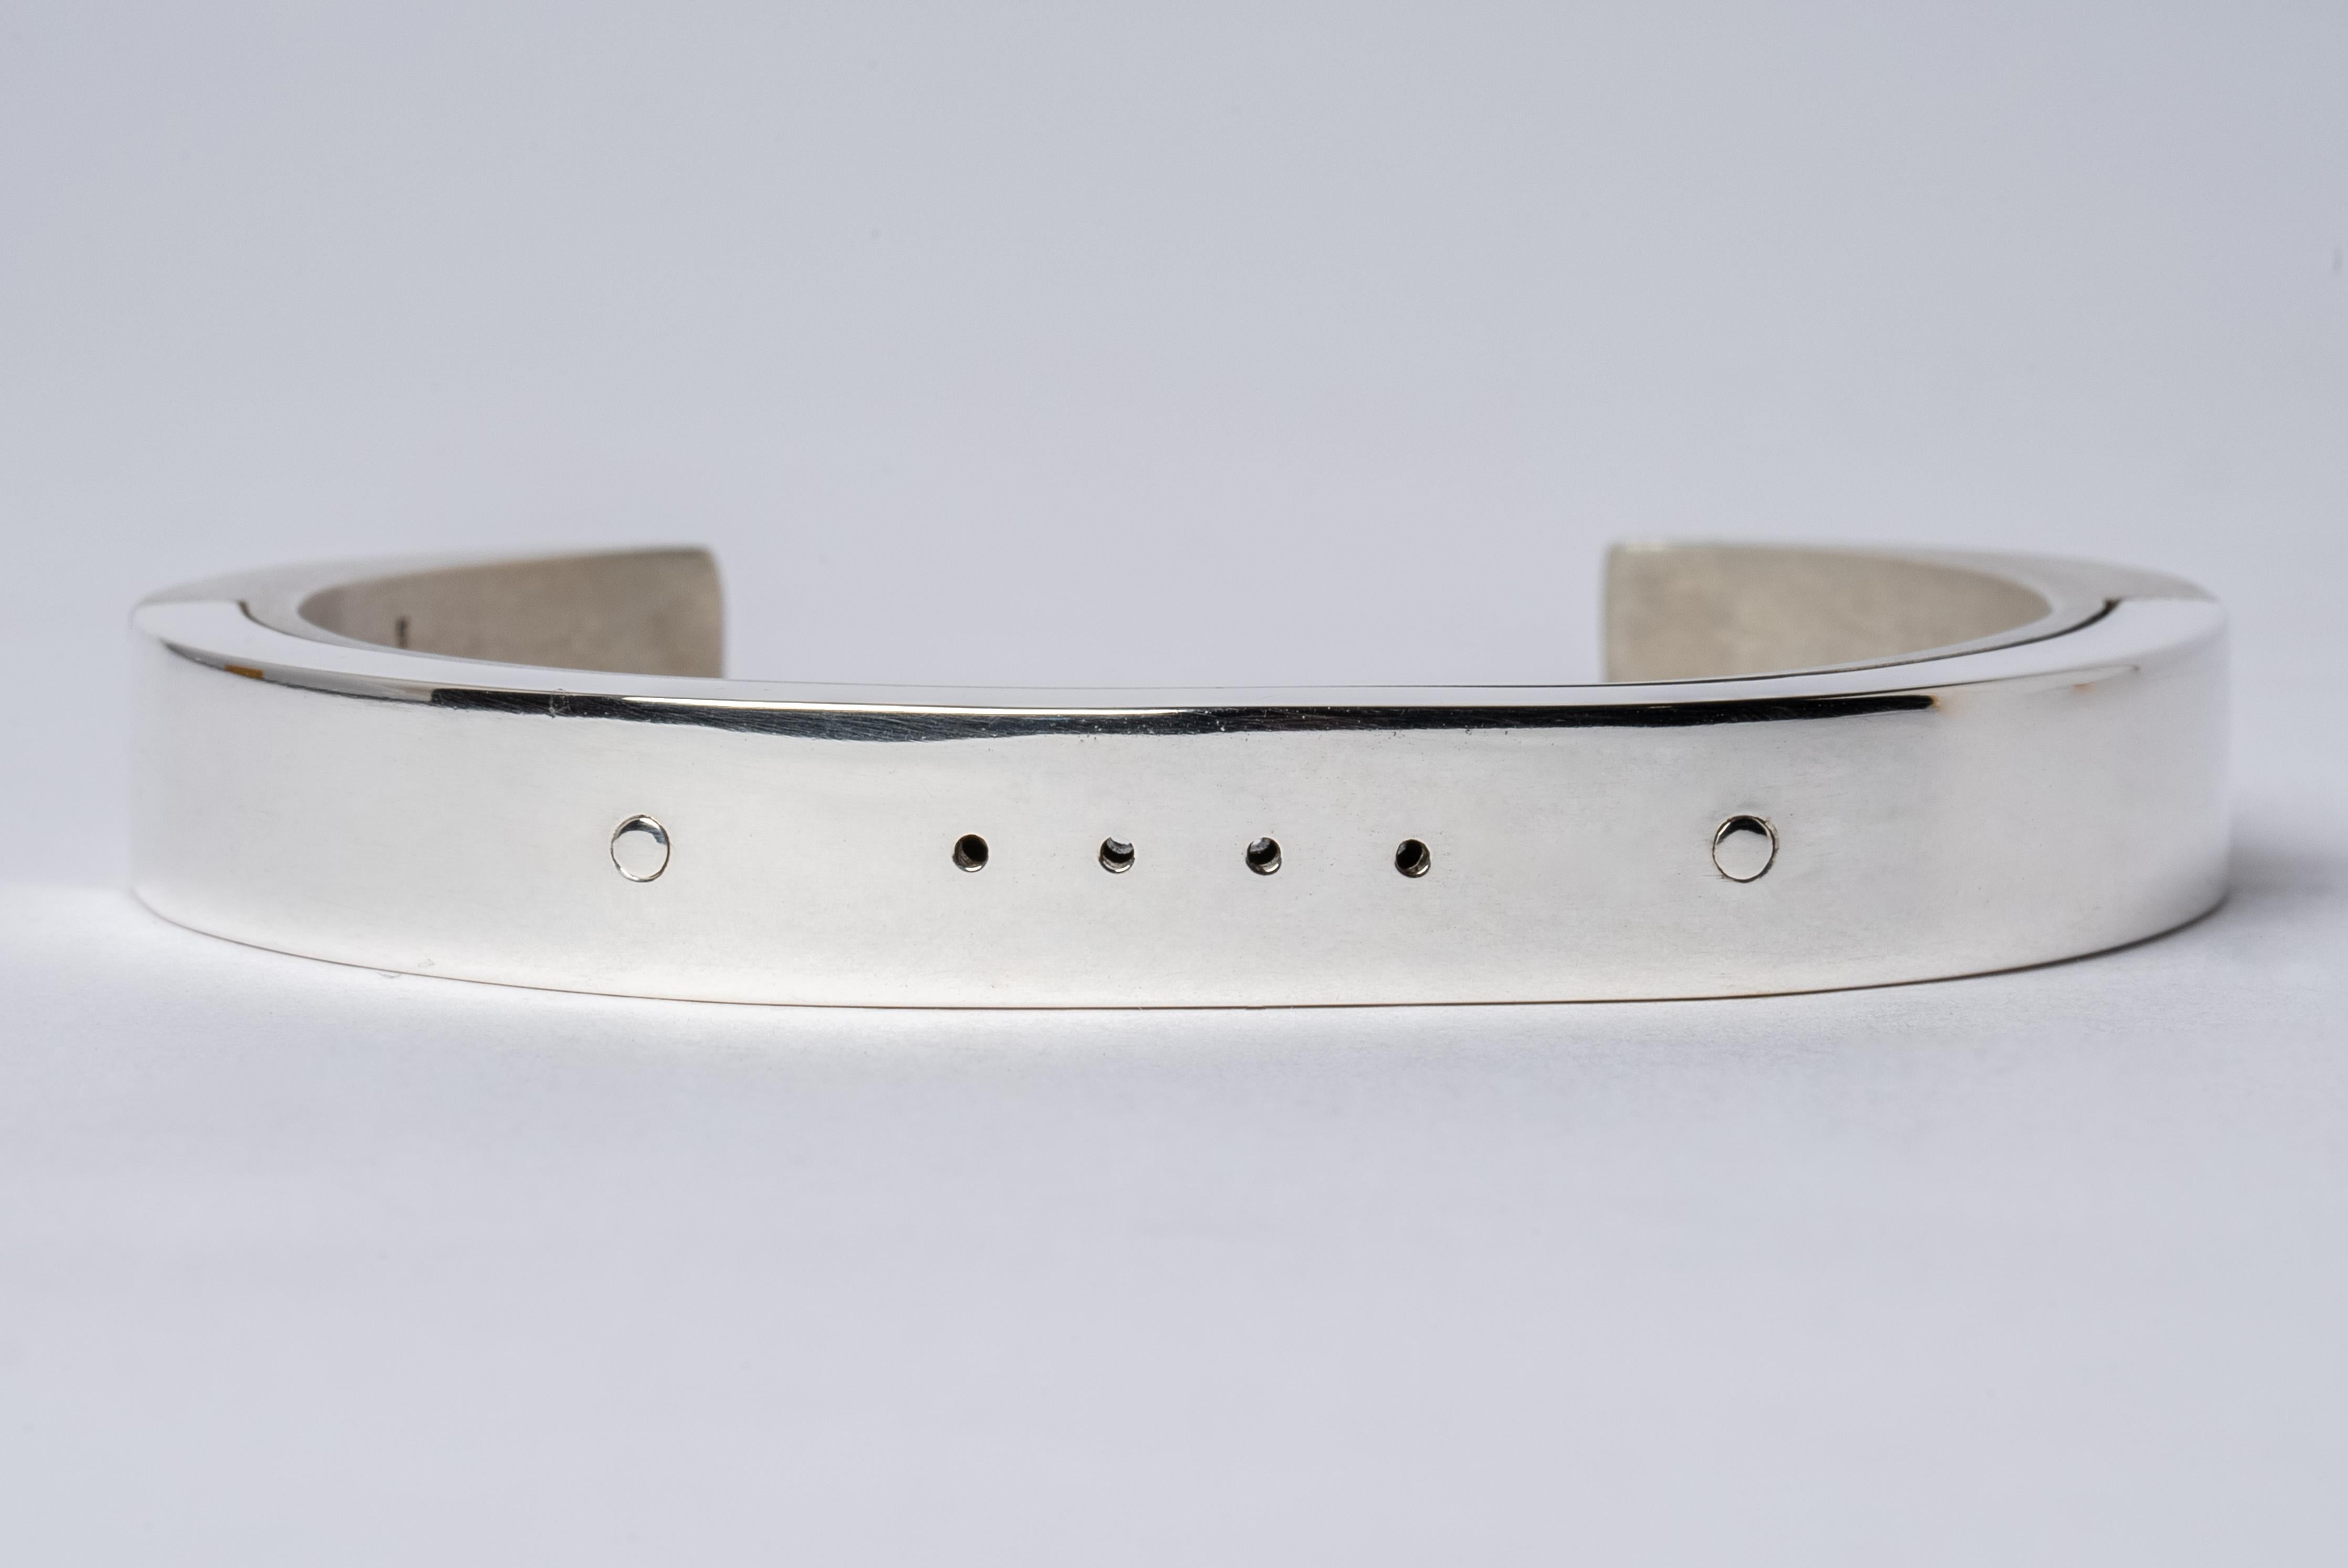 Bracelet in acid treated sterling silver and polished sterling silver.
The Sistema series is first family within Parts of Four. As a mode of creation it expresses the core principle of P/4 which is modularity. The 